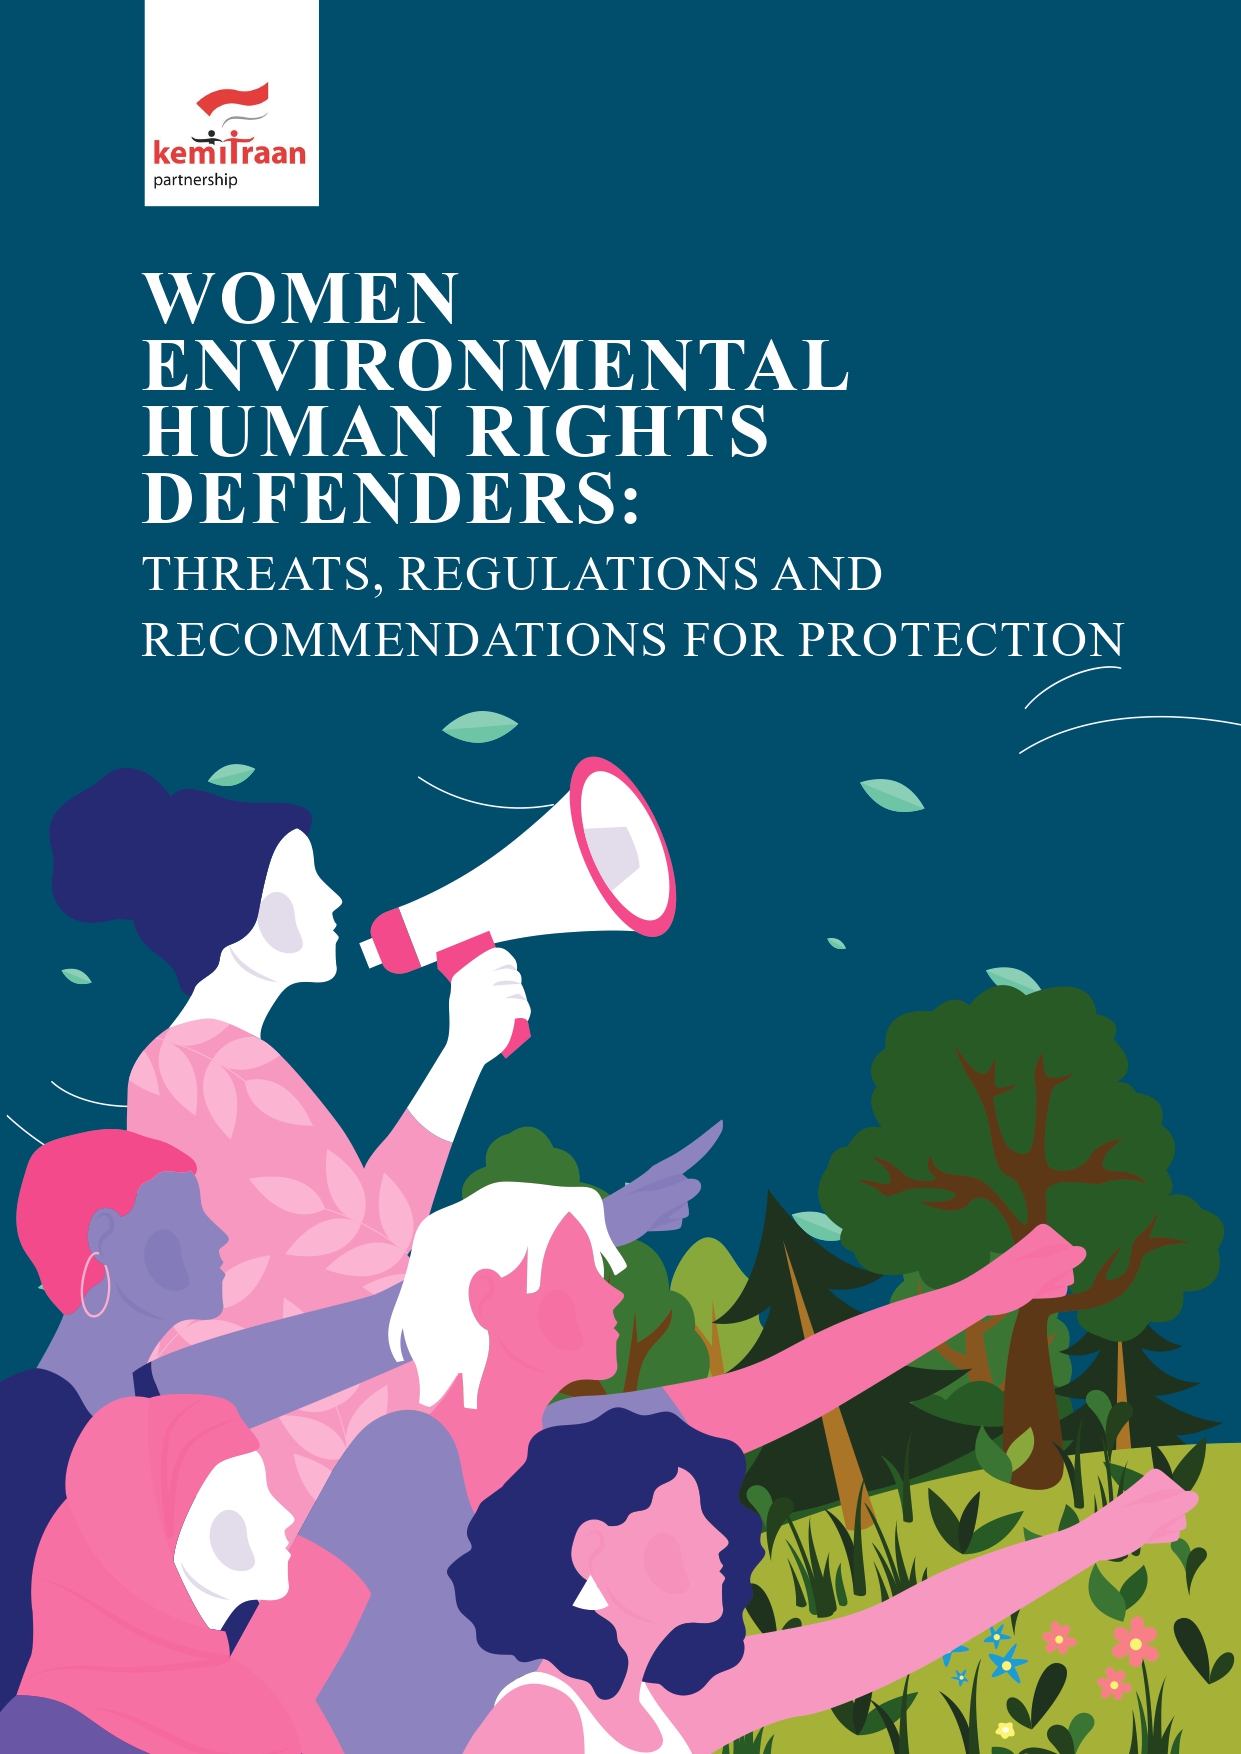 Women Environmental Human Rights Defenders: Threats, Regulations and Recommendations for Protection